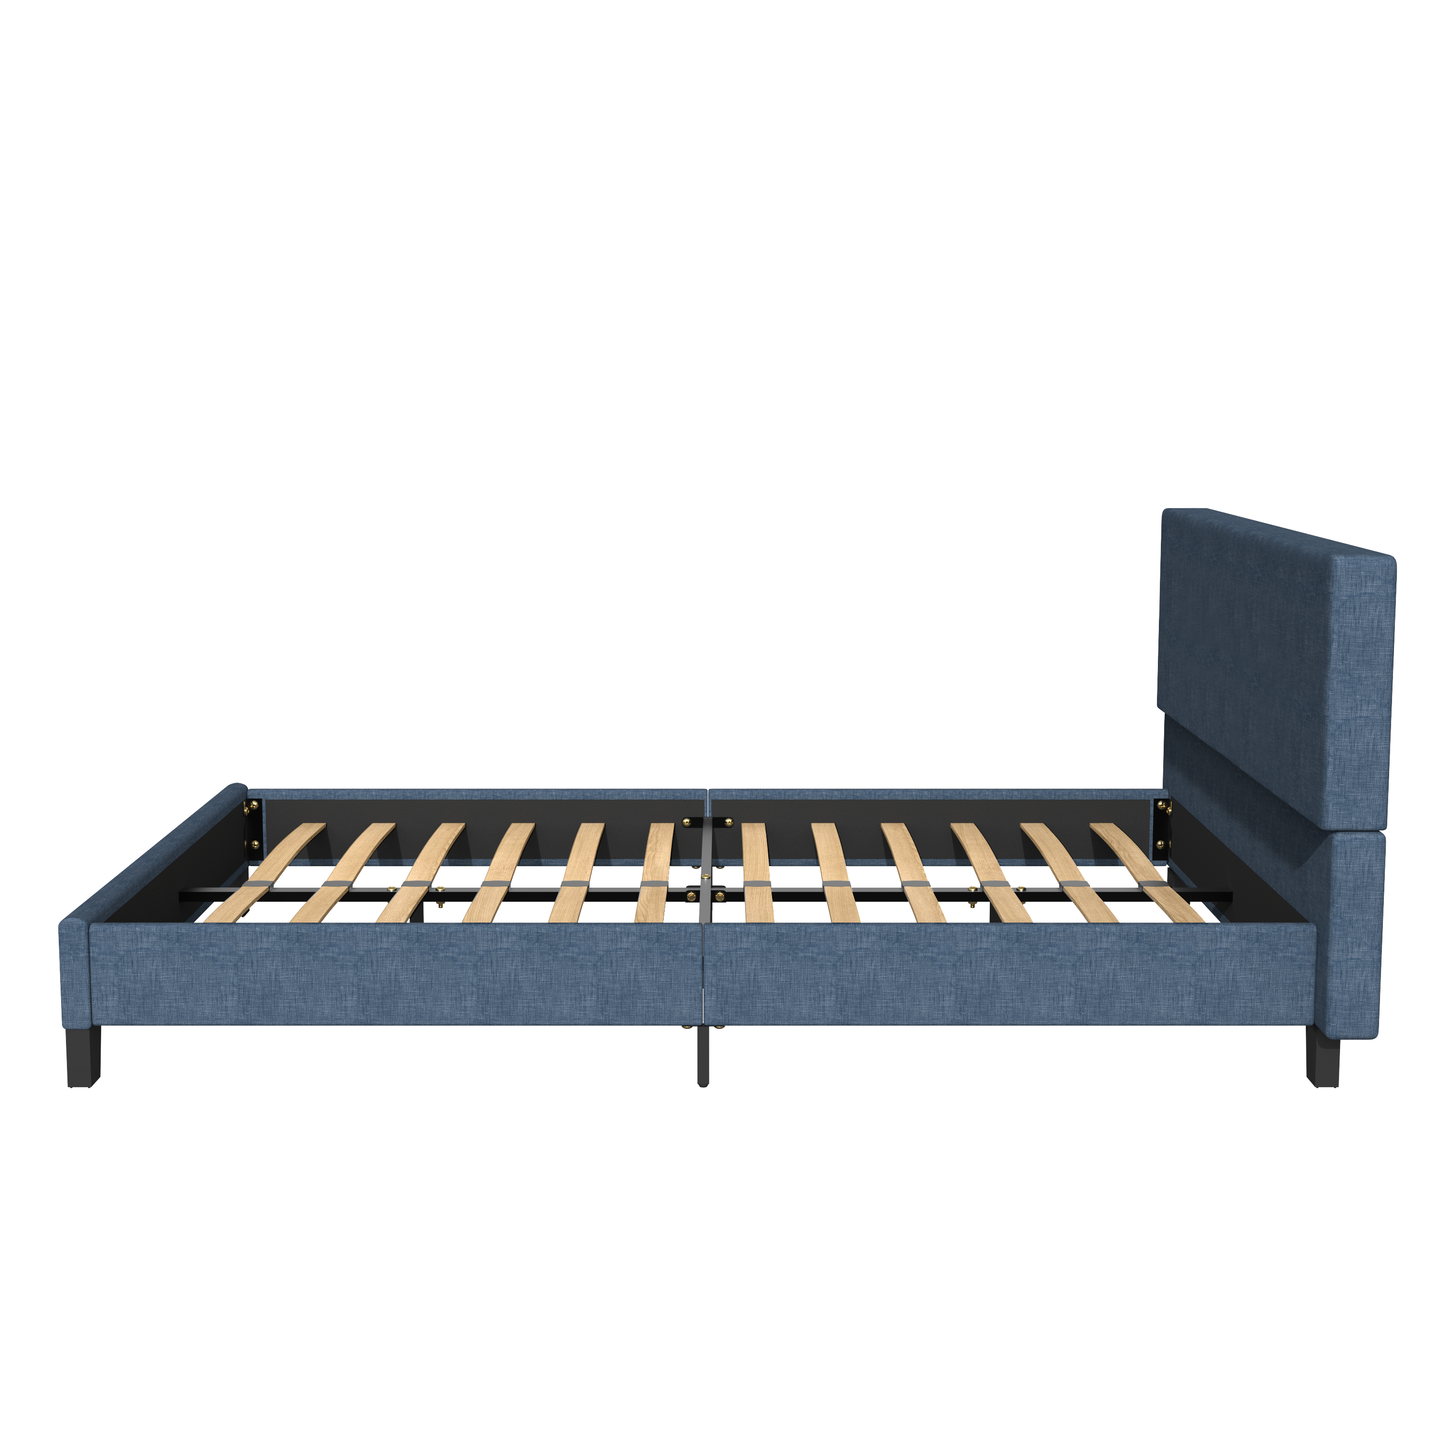 SYNGAR Dark Blue Fabric Upholstered Platform Bed Frame Full Size with Elegant Headboard, Wood Frame Bedroom Furniture with Strong Slat Support, No Box Spring Needed, Noise Free, Easy Assembly